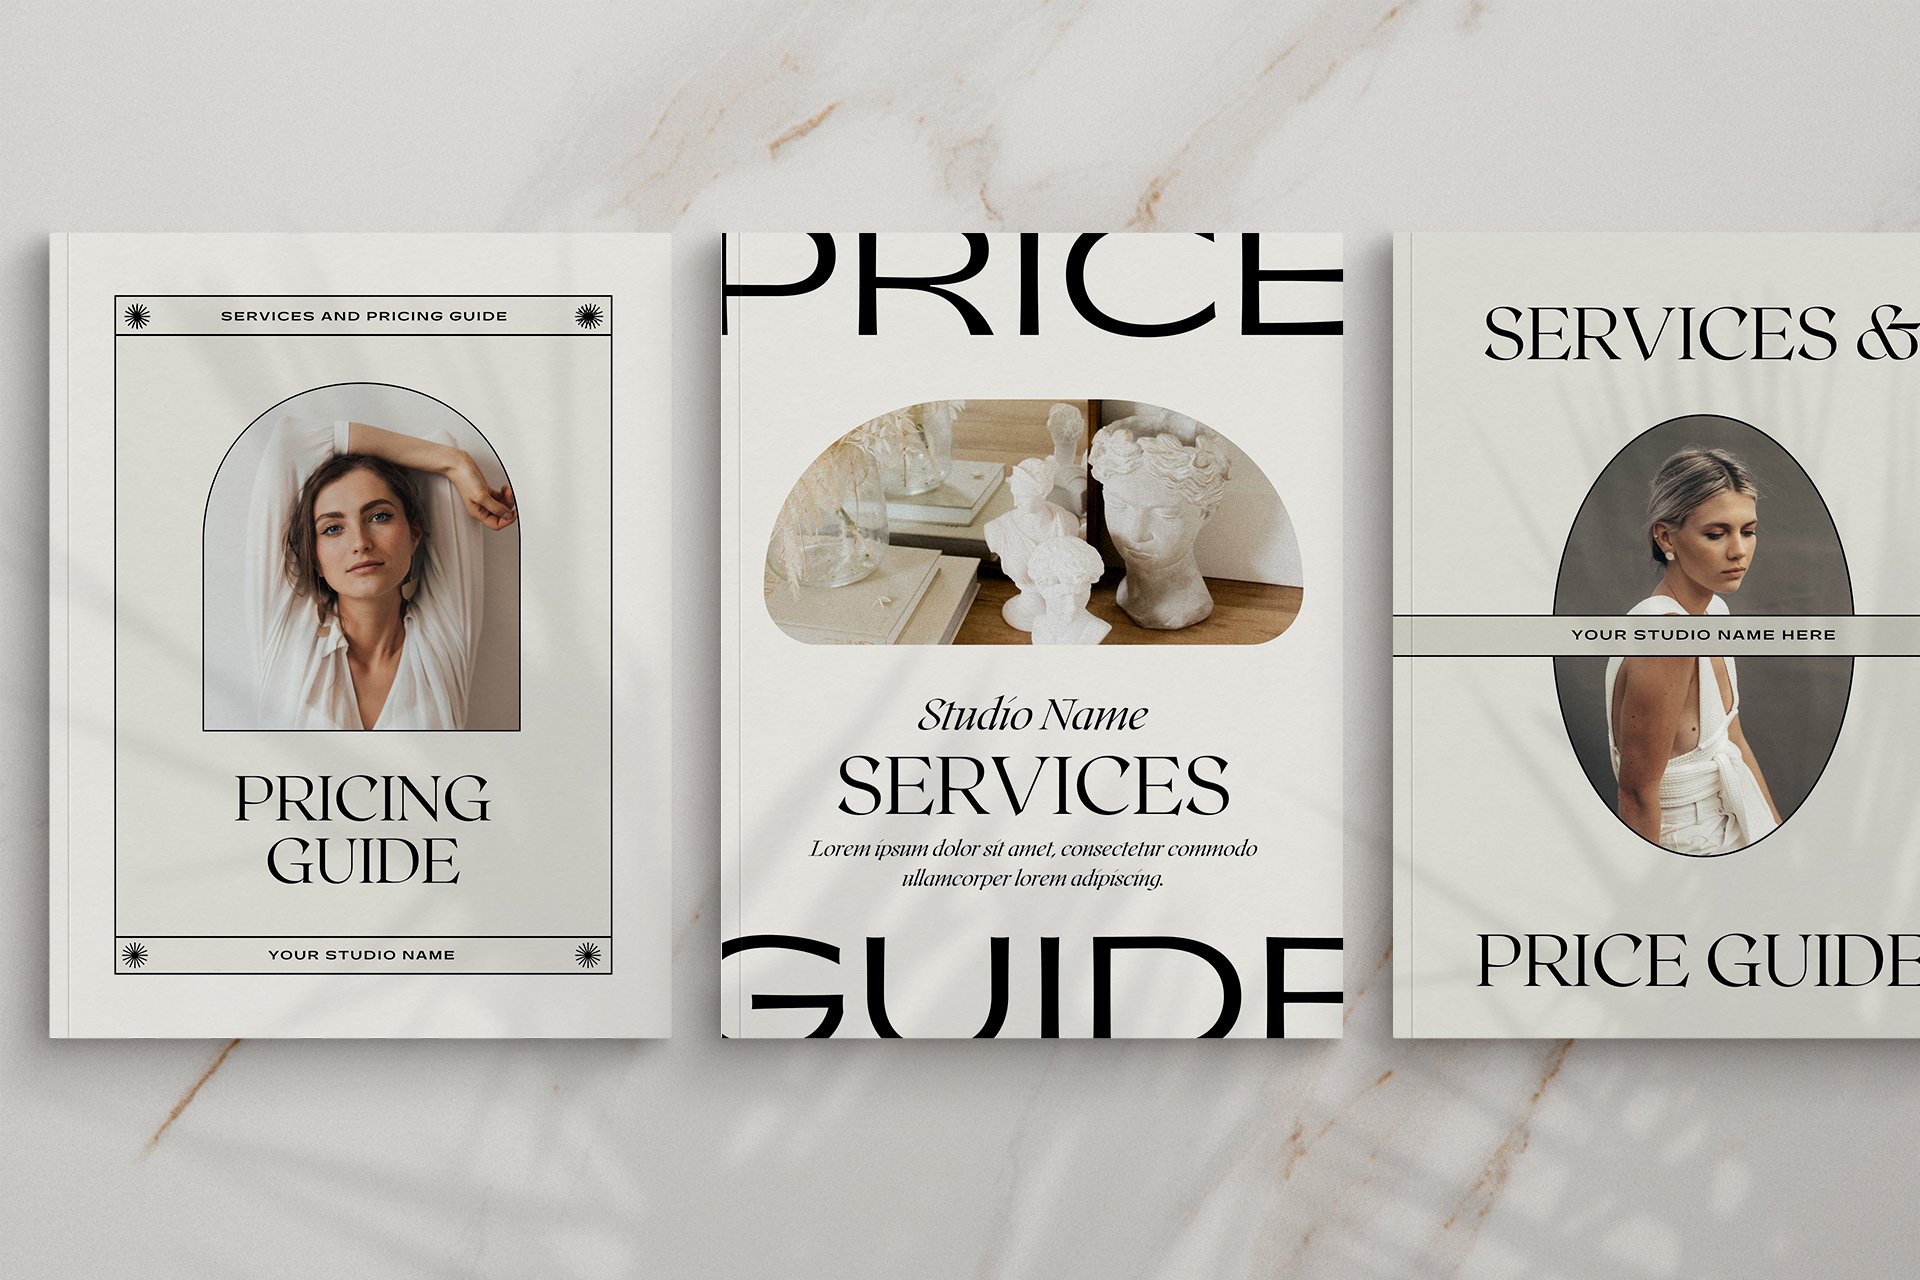 5 services and pricing guide price menu magazine ebook guide business photography canva template aestjetic 539